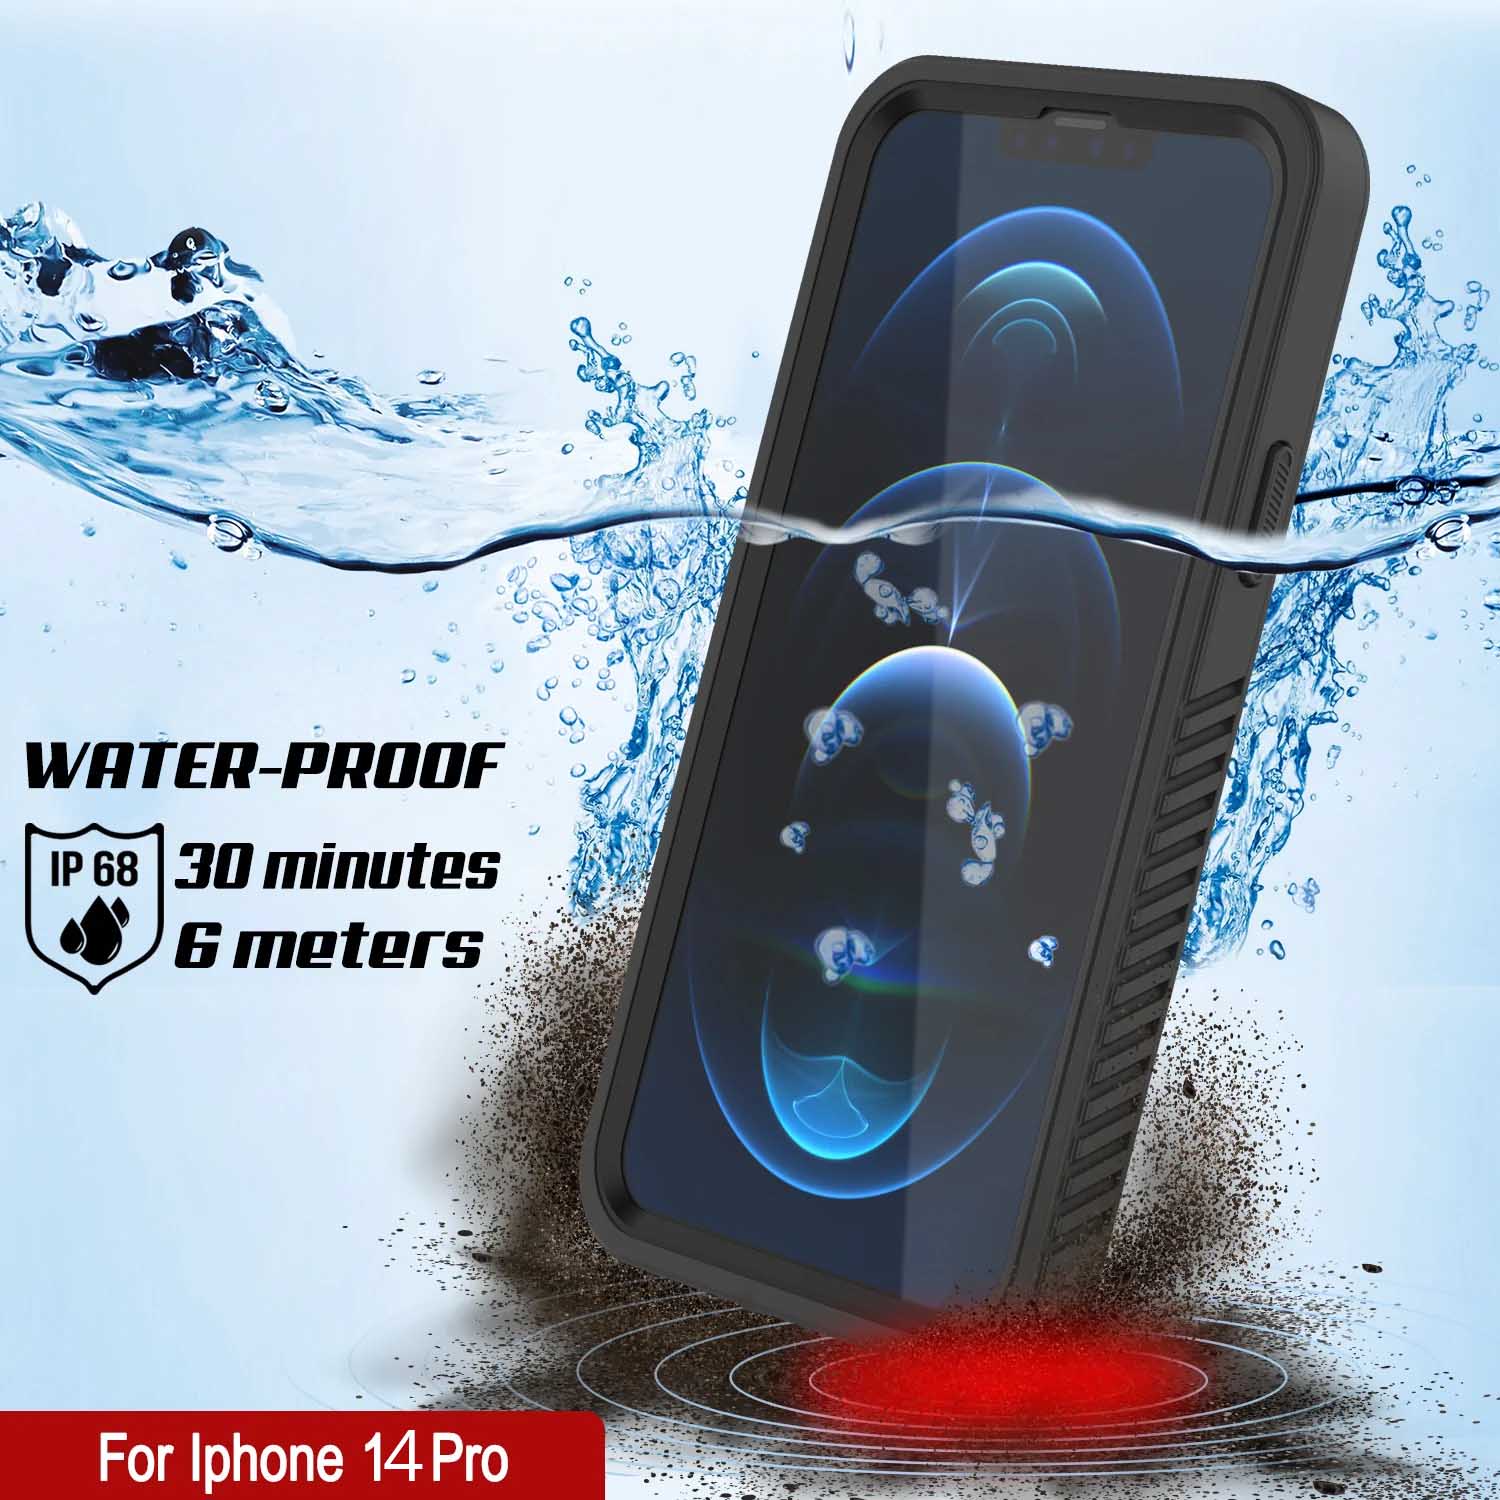 iPhone 14 Pro Waterproof Case, Punkcase [Extreme Series] Armor Cover W/ Built In Screen Protector [Black]